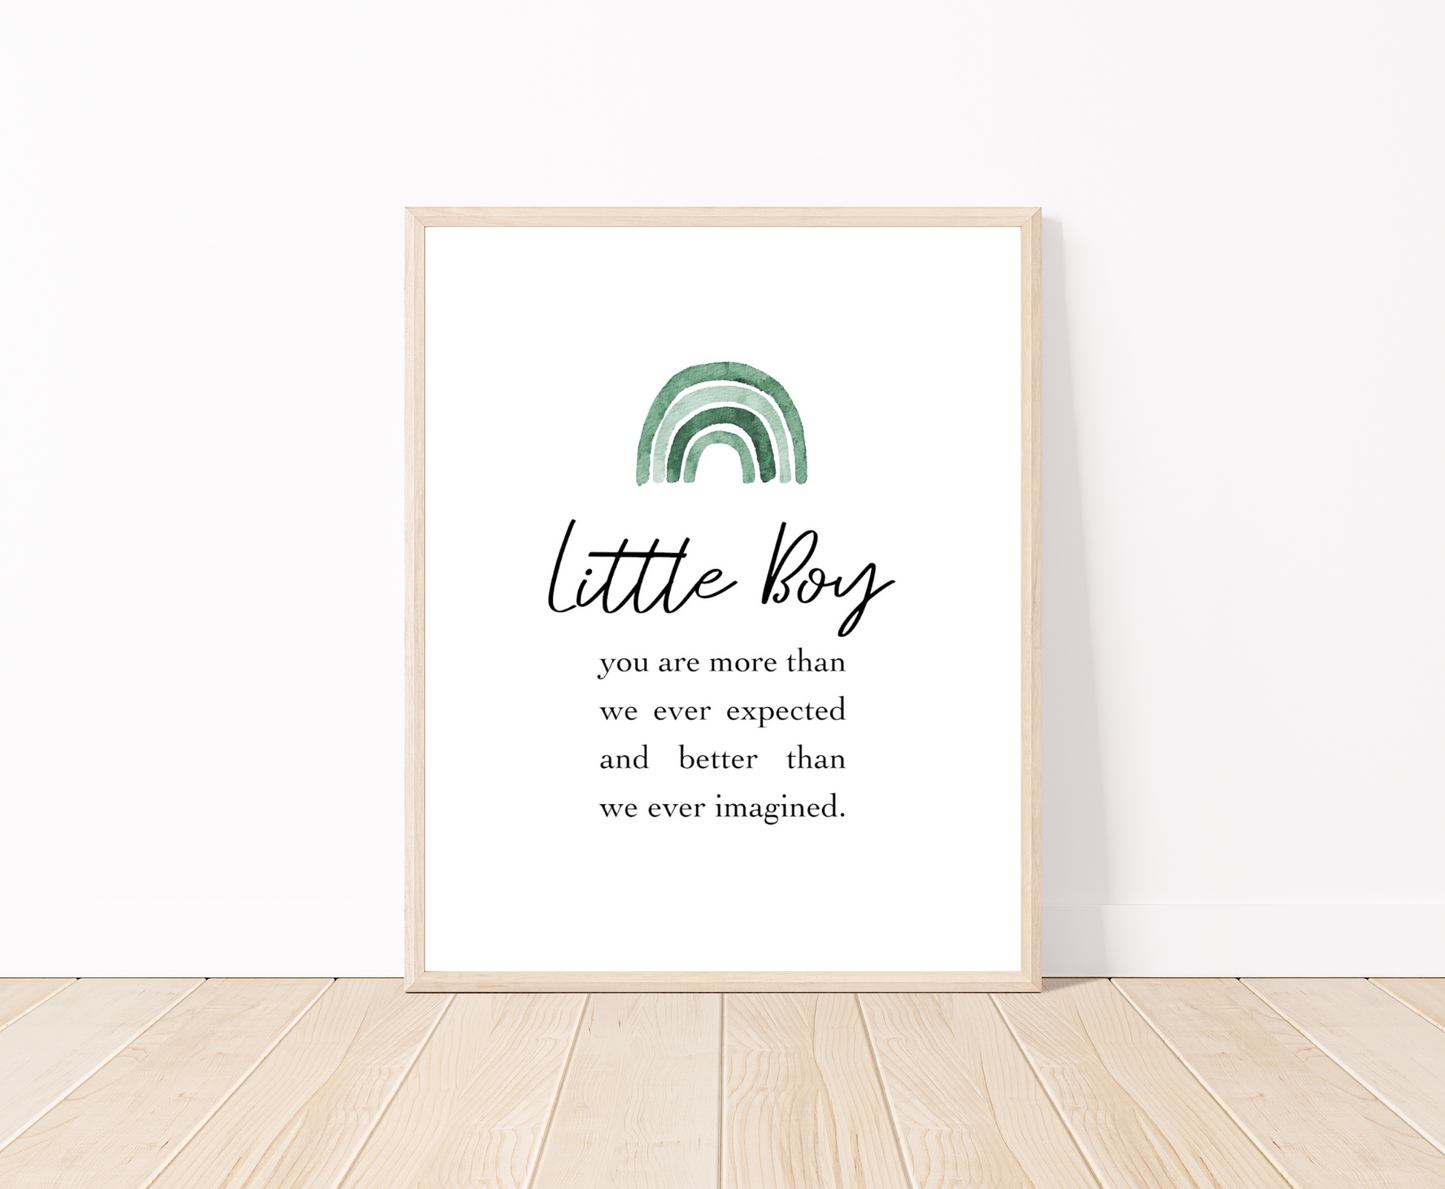 A frame showing a graphic for a little boy’s room displaying a rainbow design in different shades of green  and includes a piece of writing that says: Little boy, you are more than we ever expected and better than we ever imagined. The frame is placed on a parquet floor.